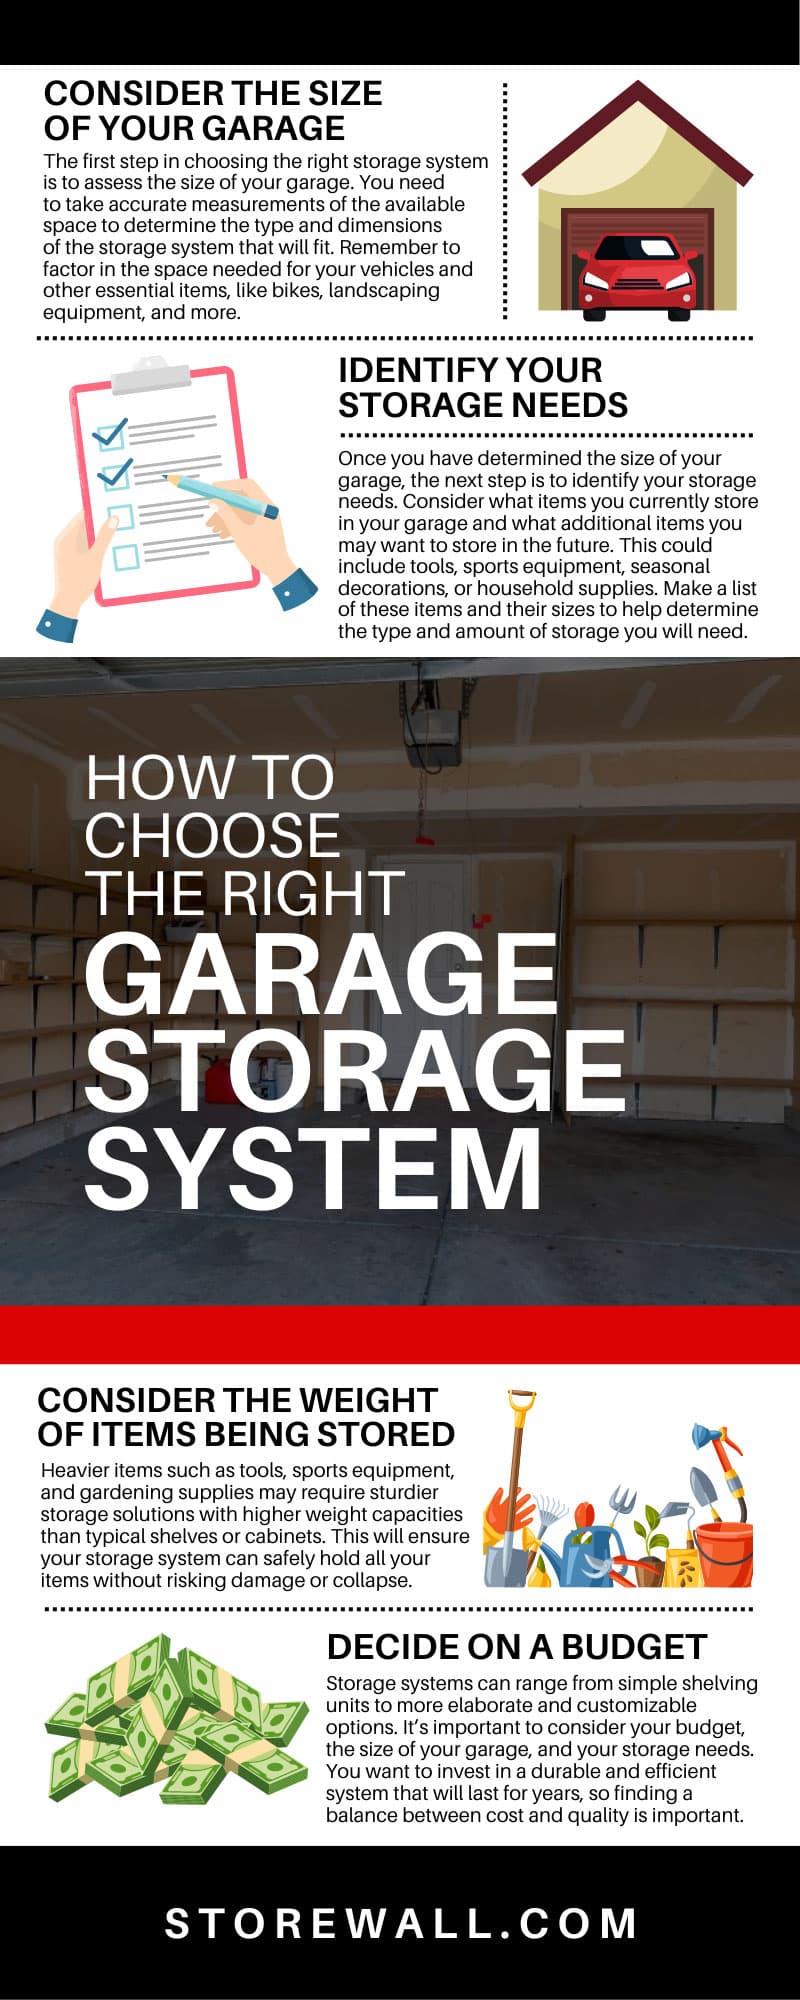 How To Choose the Right Garage Storage System